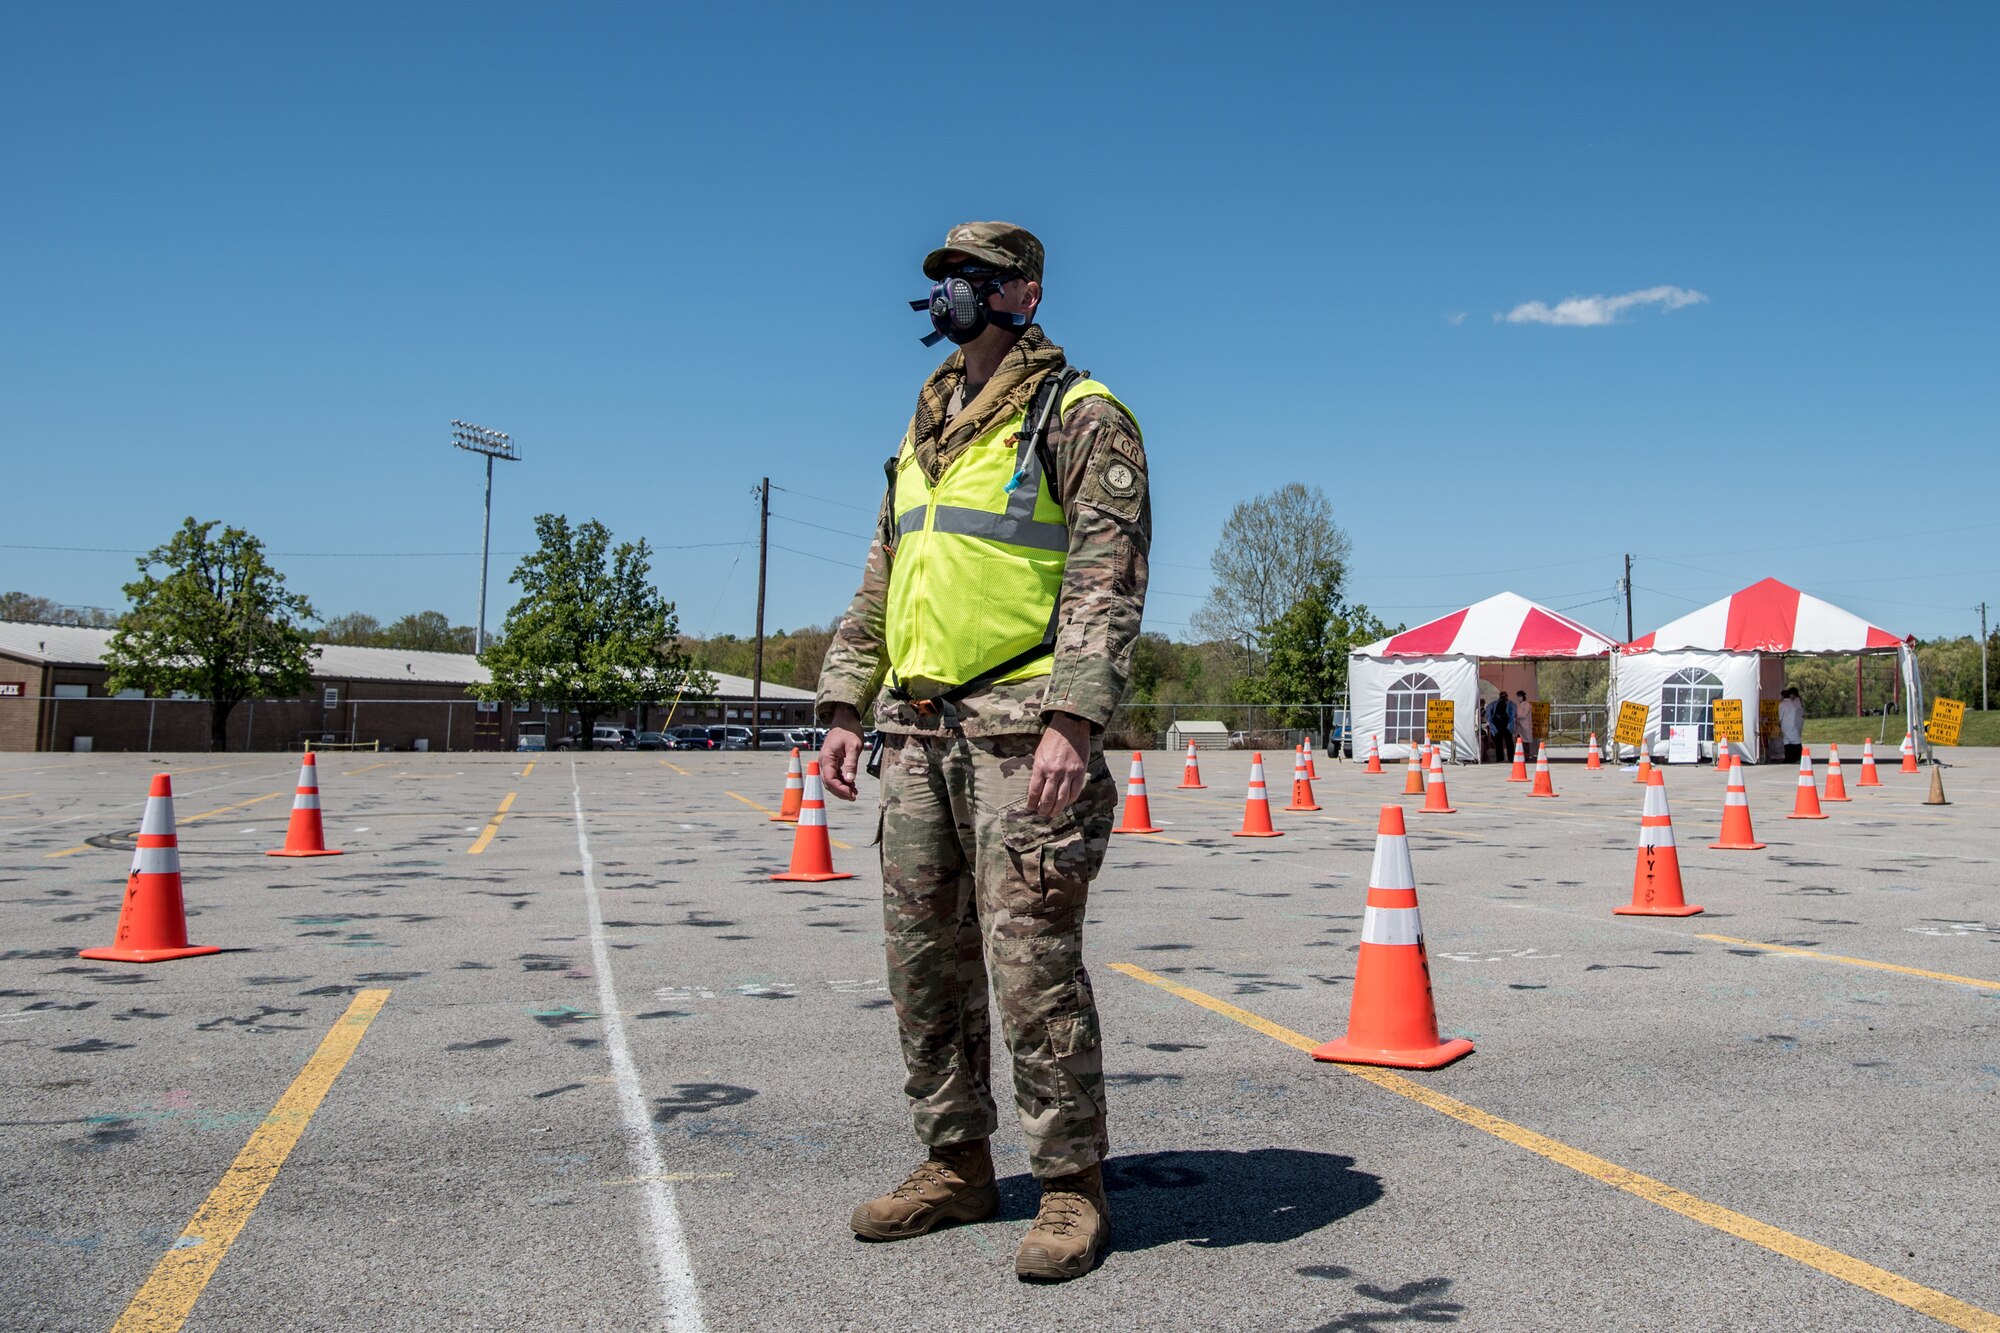 Master Sgt. Jason Michel, a security forces specialist for the Kentucky Air National Guard’s 123rd Contingency Response Group, directs patients through a drive-through testing station for COVID-19 in Madisonville, Ky., April 21, 2020. Kentucky Air Guardsmen will be supporting multiple testing sites across the state. (U.S. Air National Guard photo by Staff Sgt. Joshua Horton)